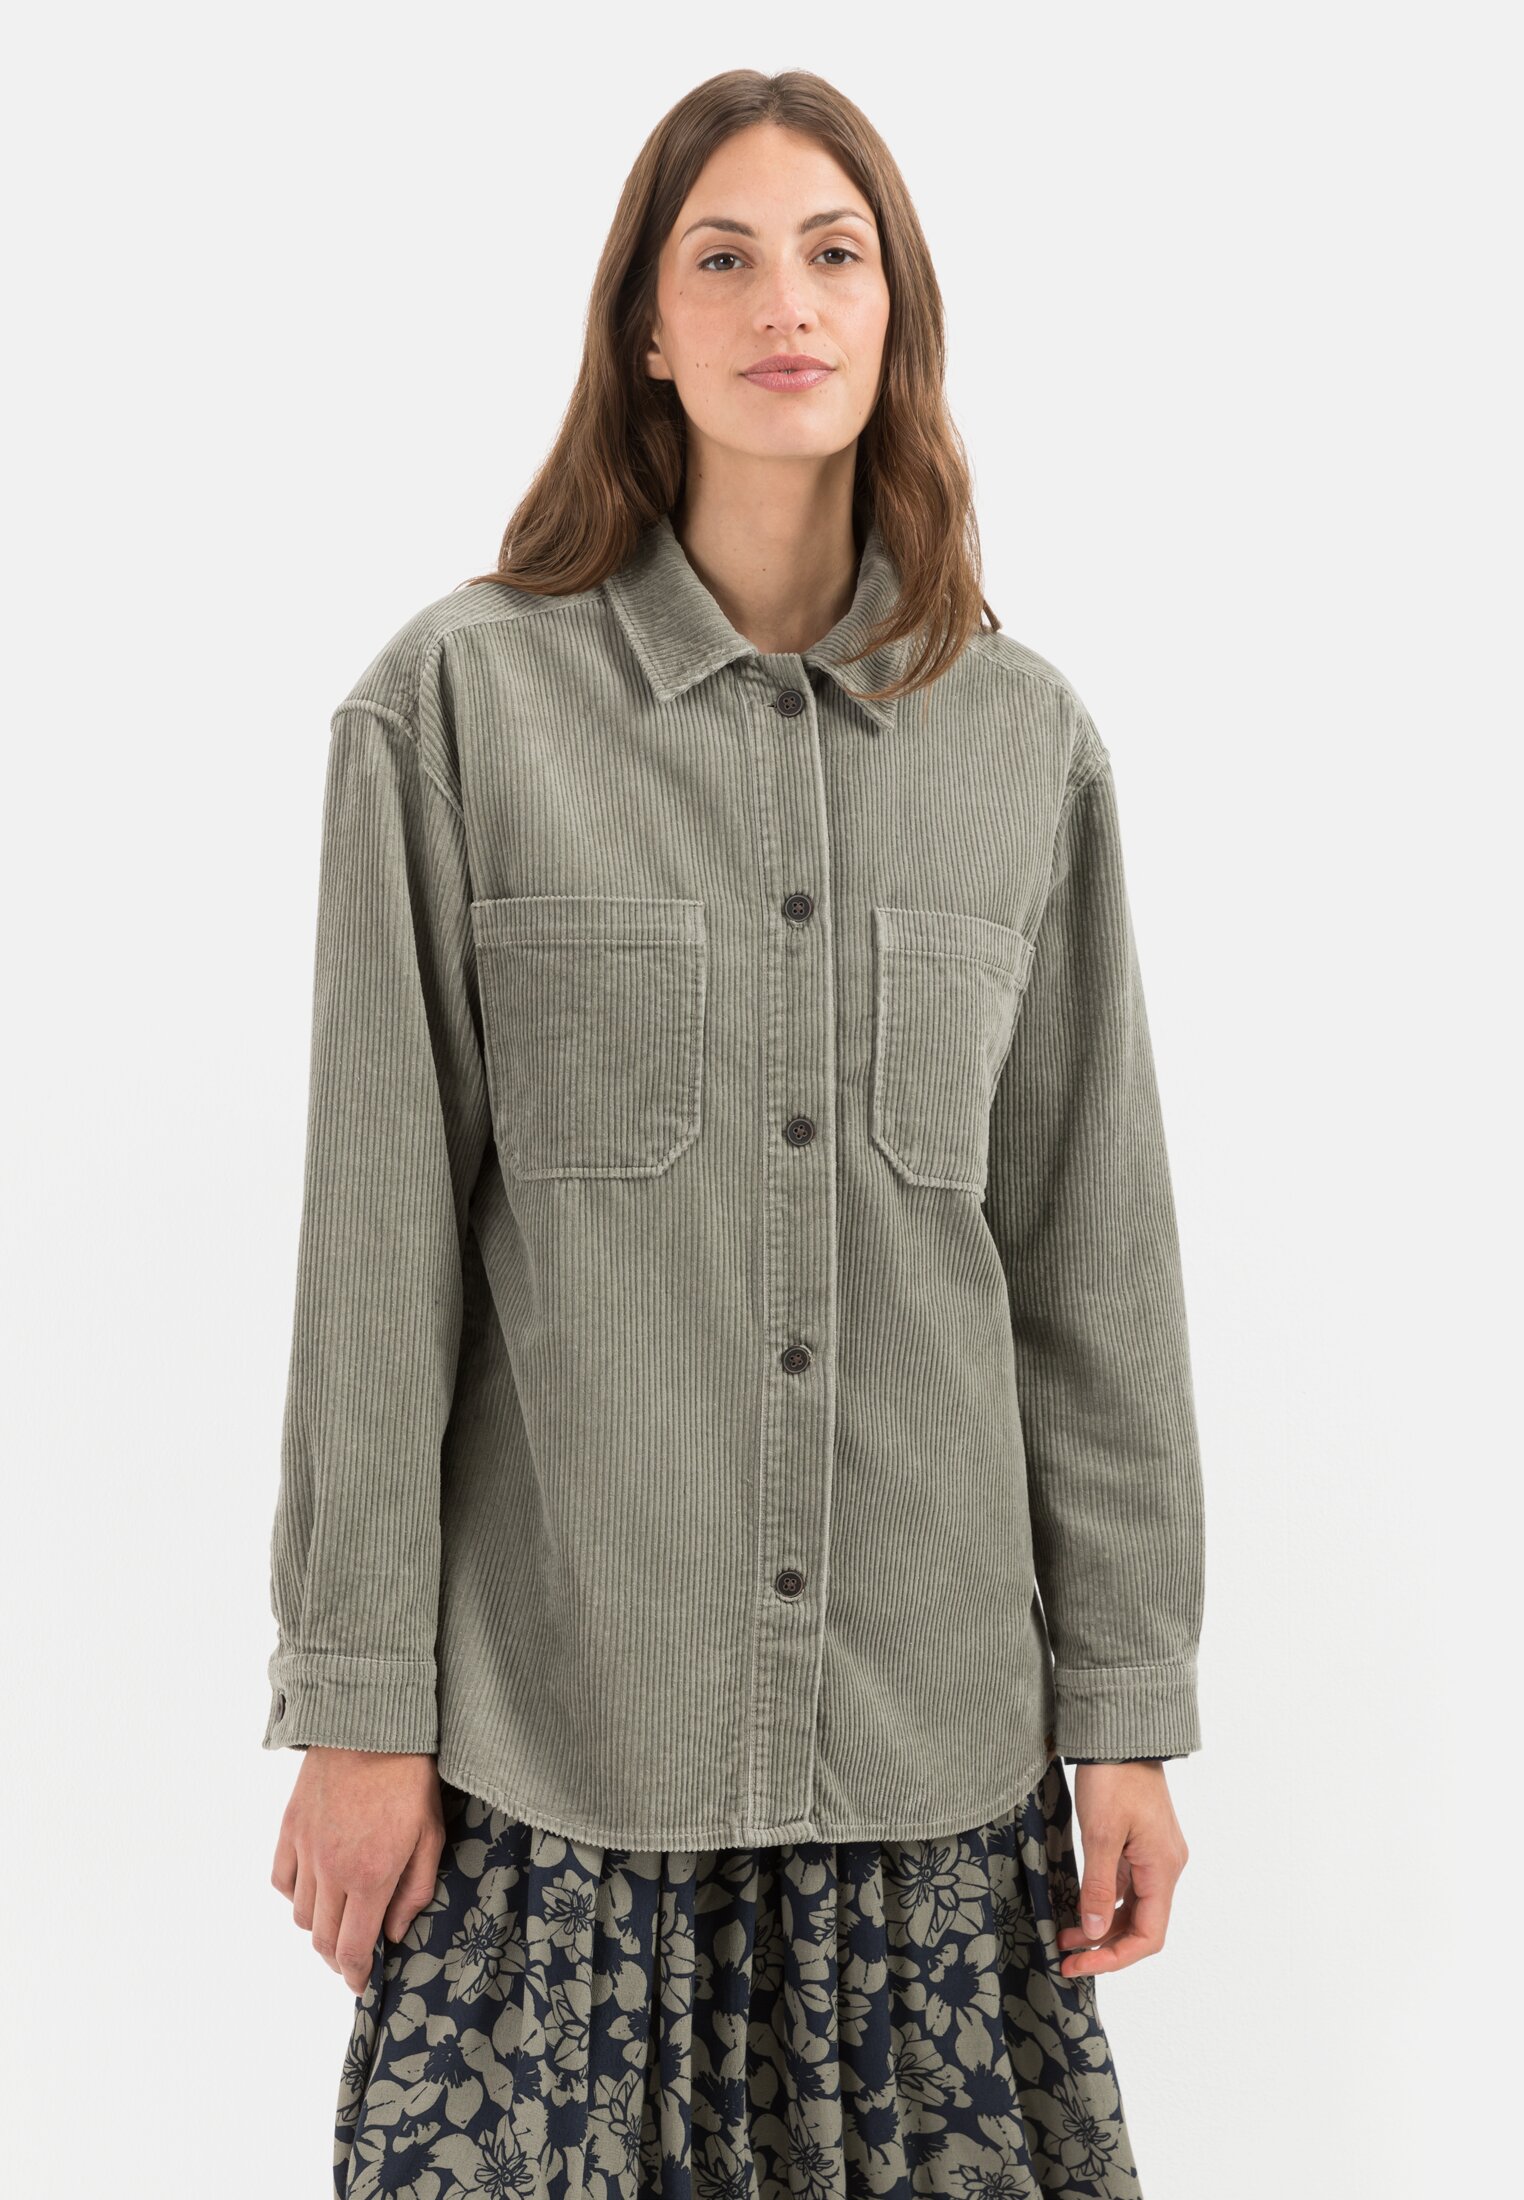 Camel Active Overshirt from corduroy